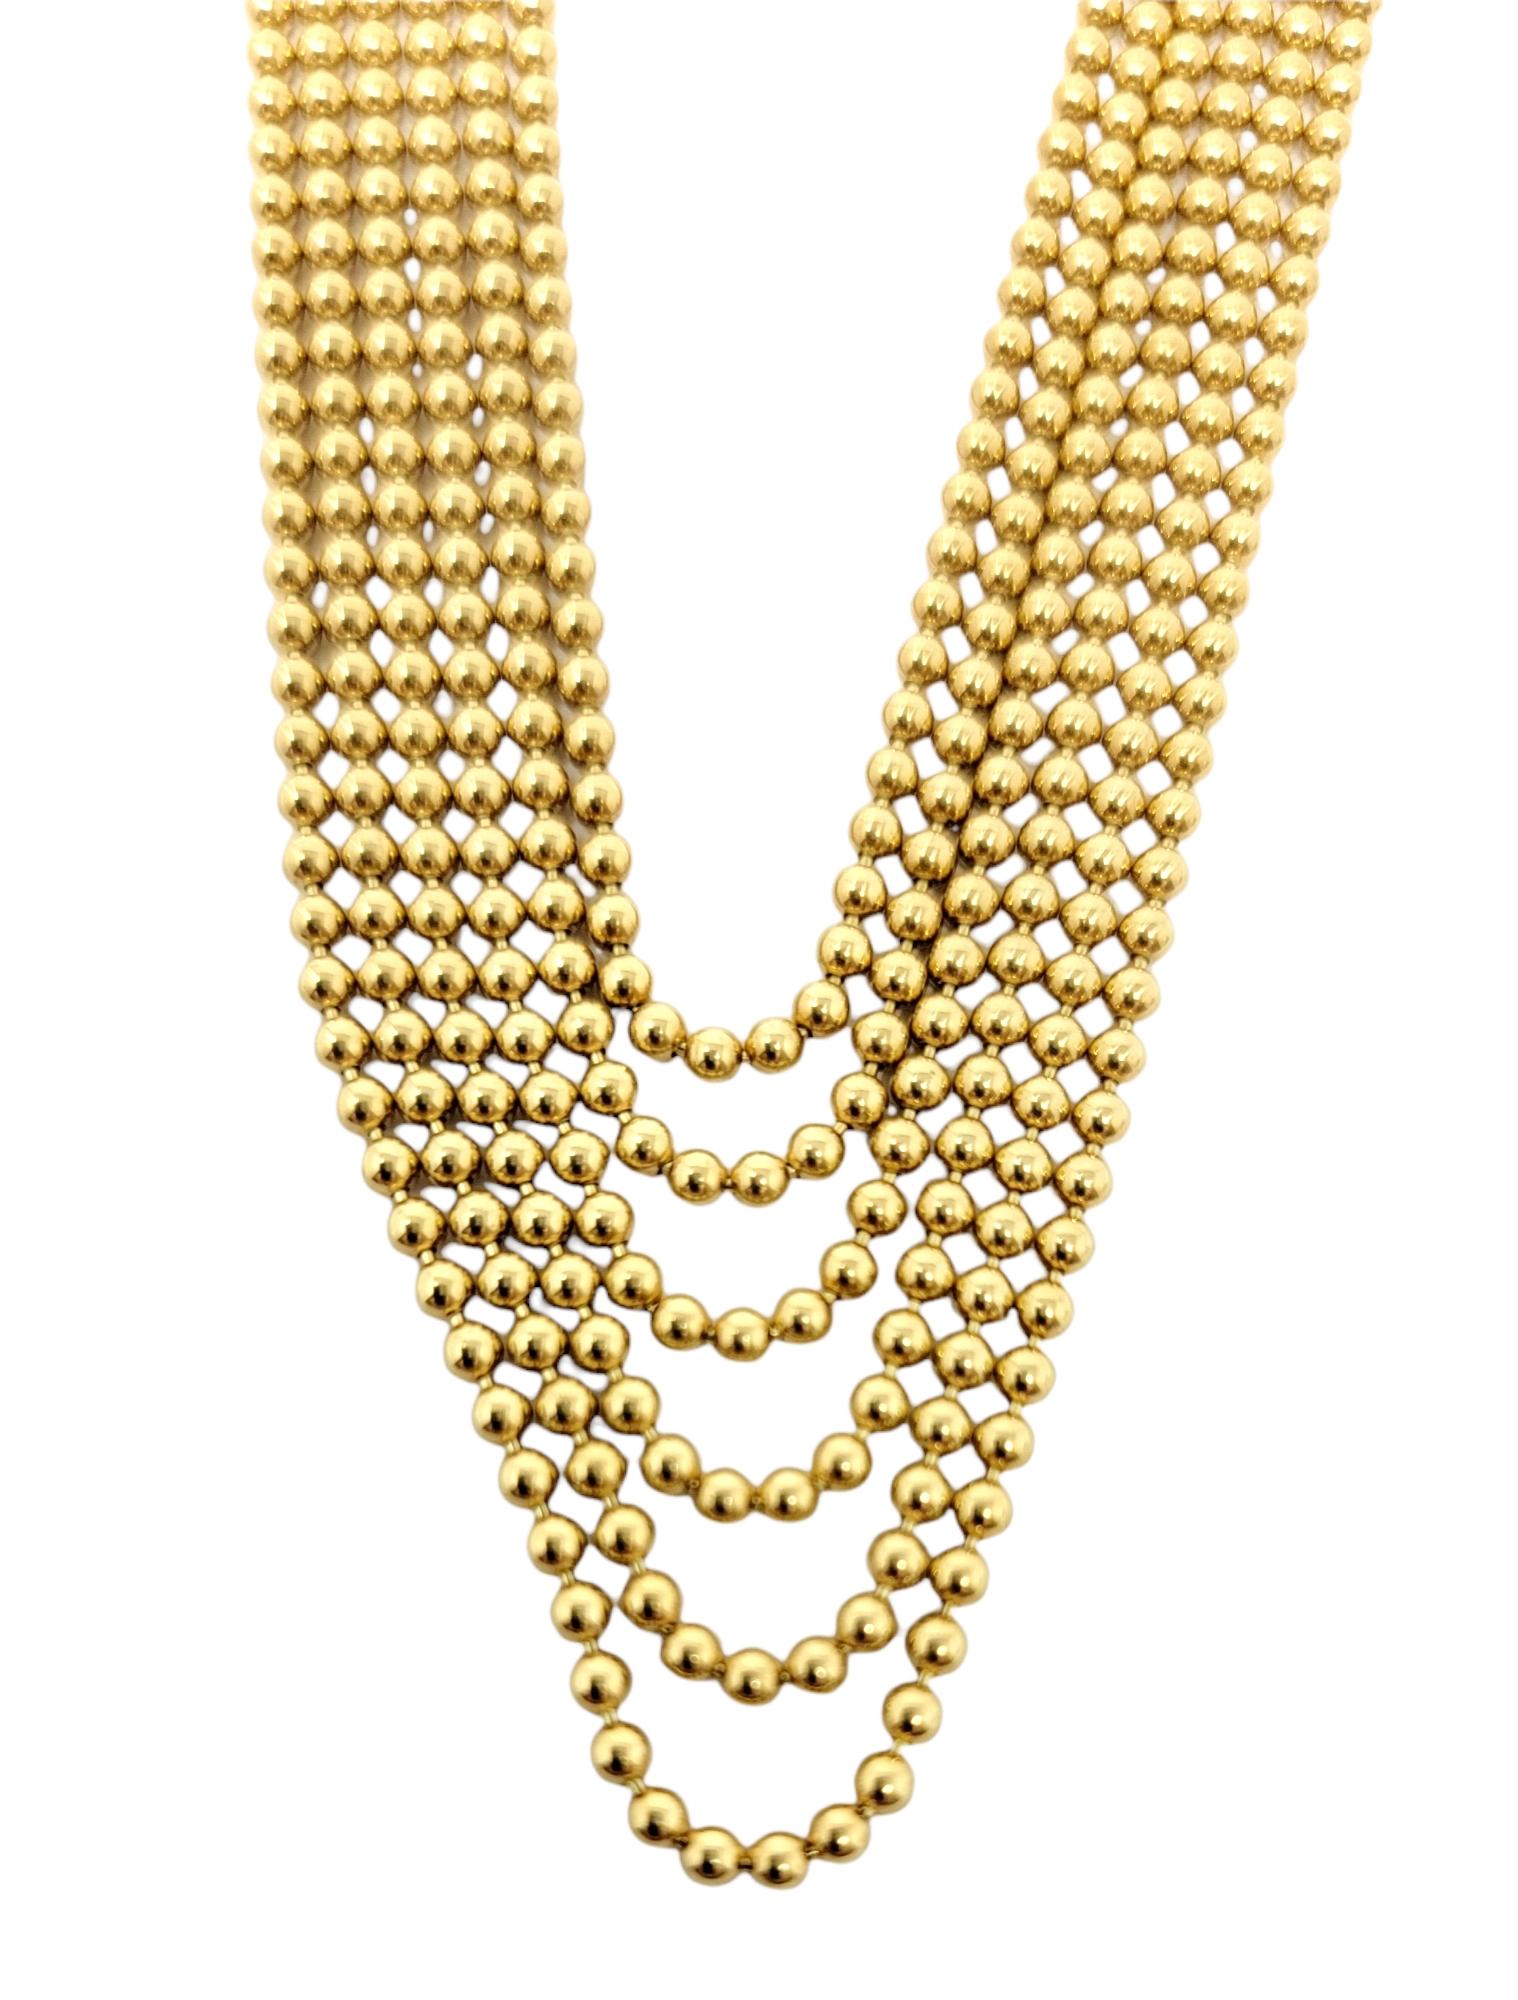 Delicate in style yet bold in design, this amazing six strand necklace from the Draperie Decollete Collection by Cartier is simply stunning. The beautifully made solid gold necklace features 6 individual strands of polished 18 karat gold ball chains